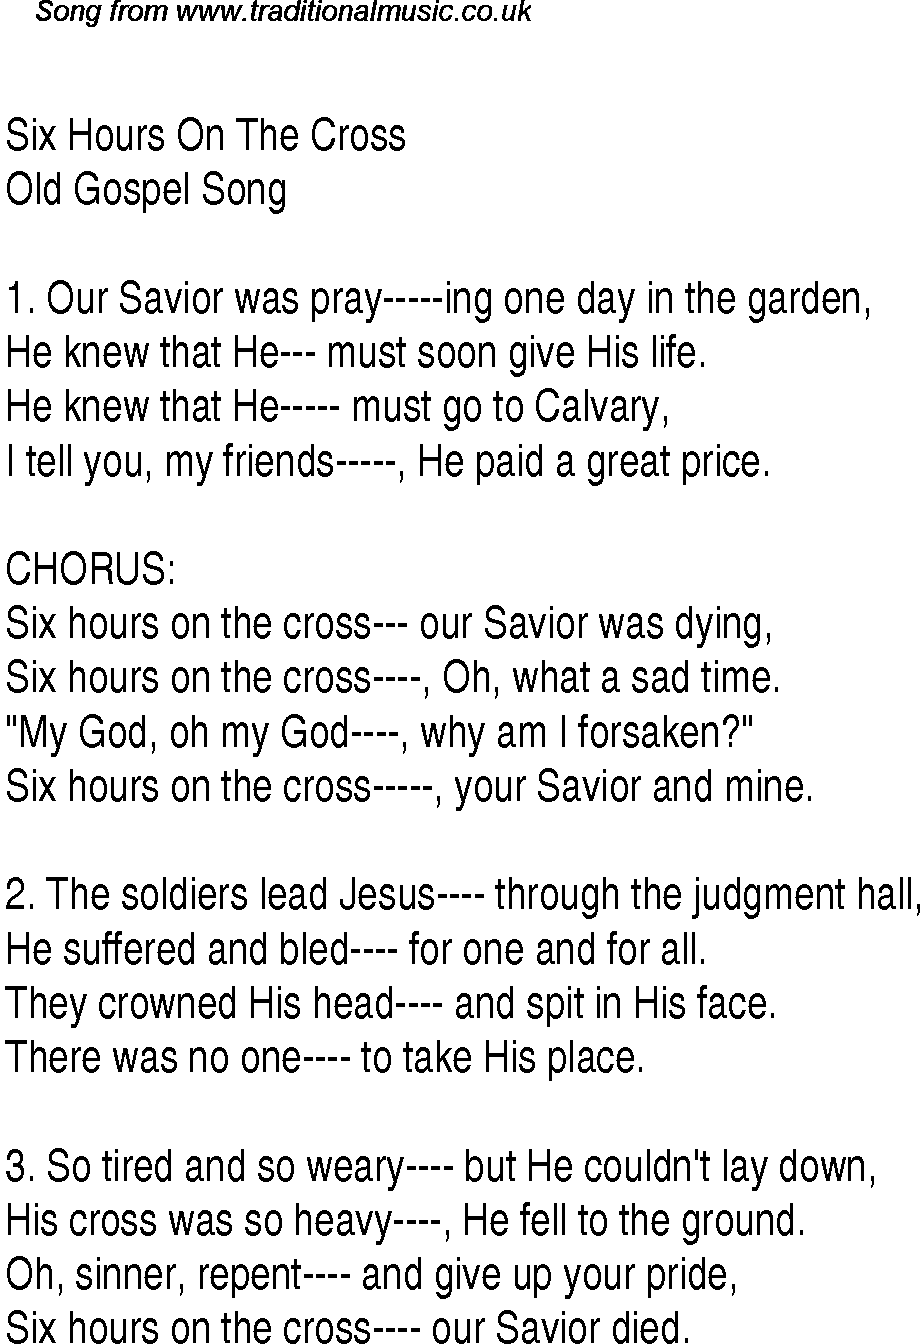 Gospel Song: six-hours-on-the-cross, lyrics and chords.